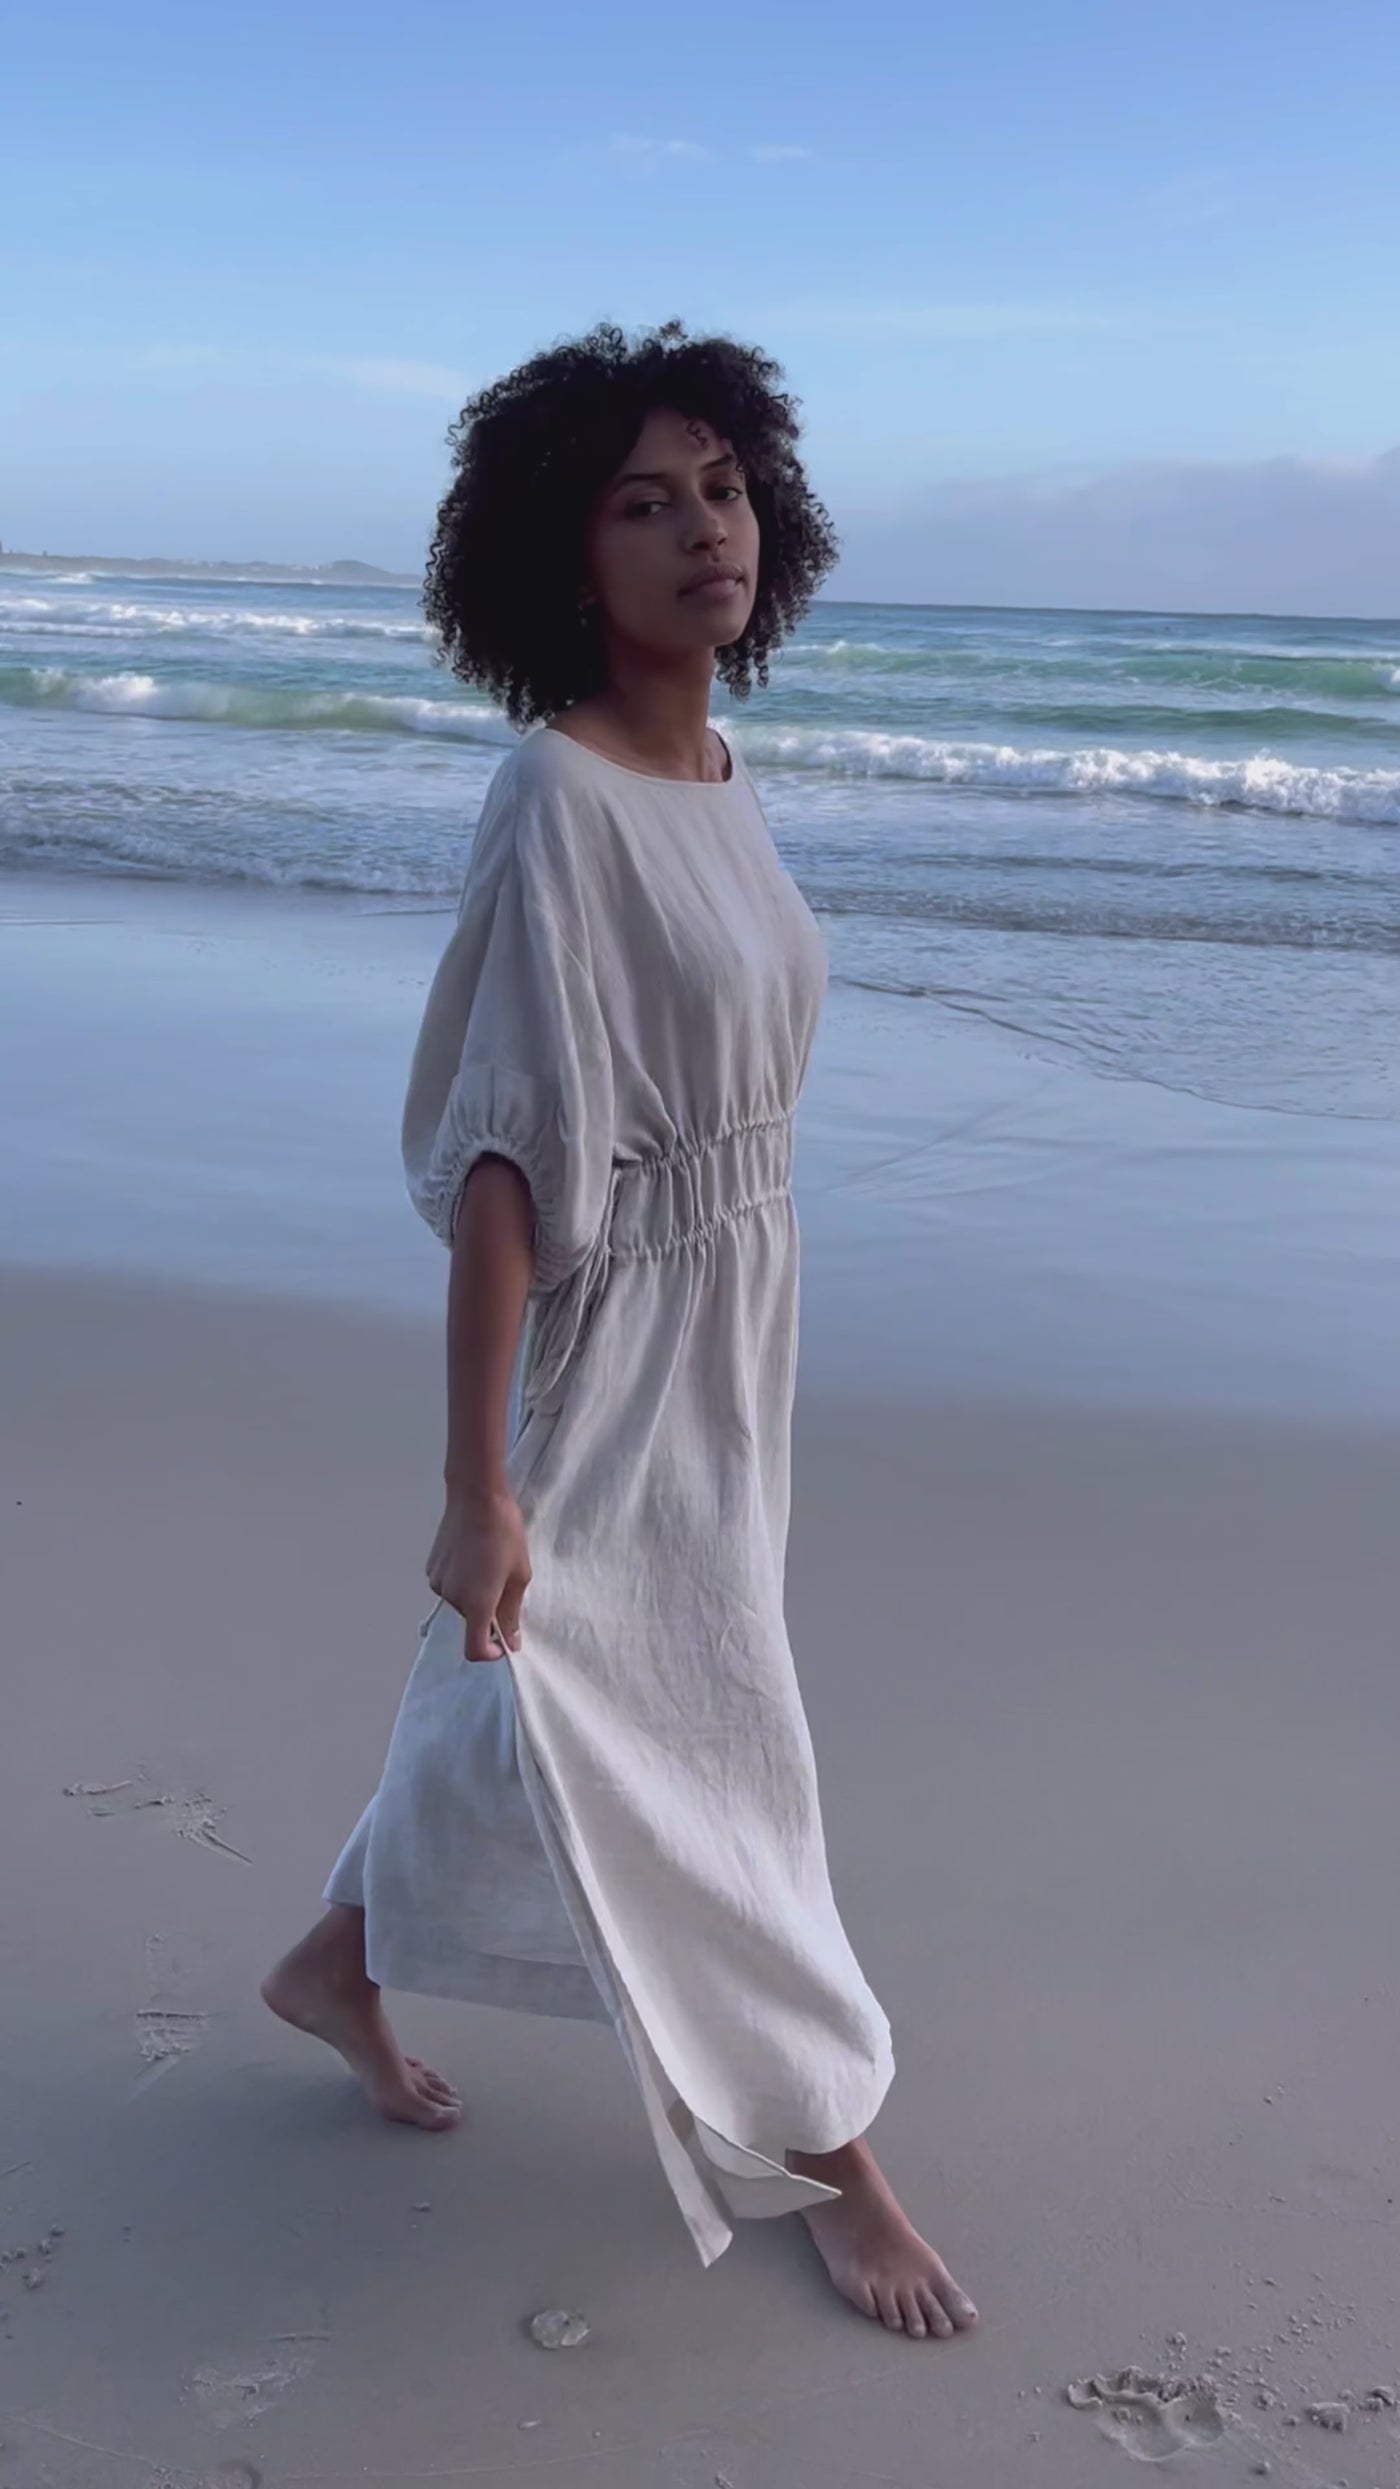 Video of Lilly Pilly Collection Valerie dress made from 100% Organic linen in Oatmeal